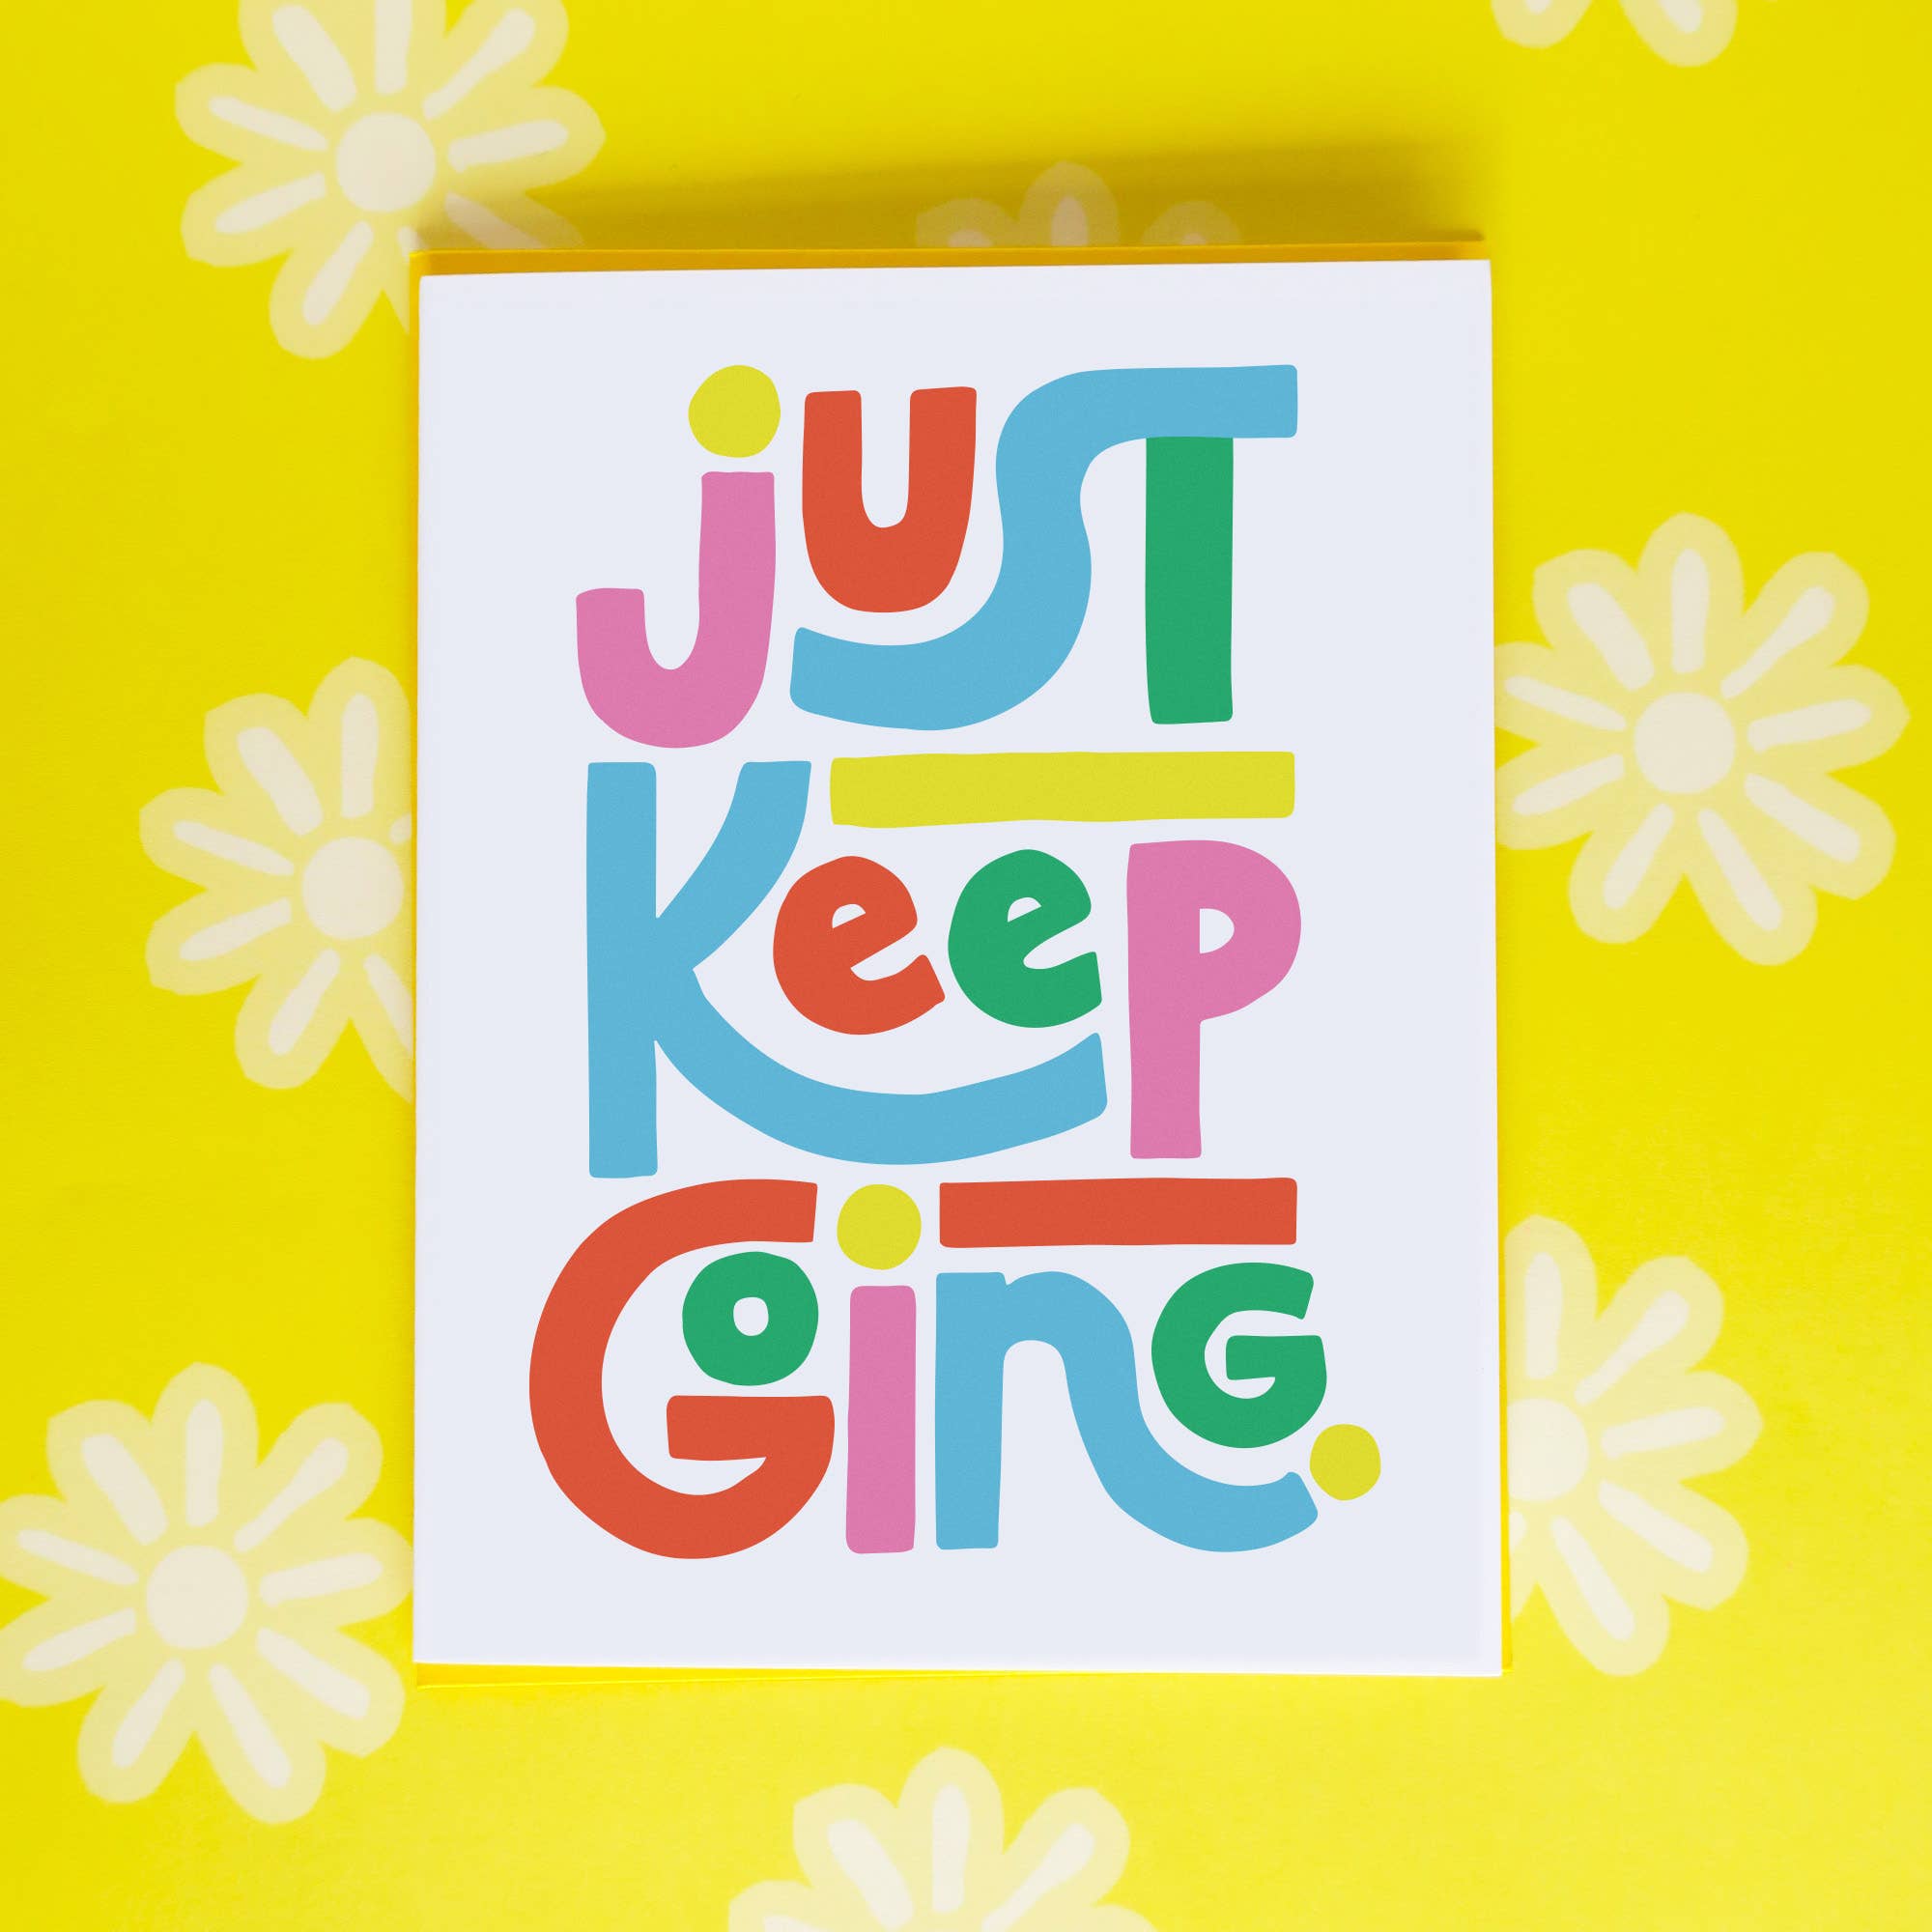 Just Keep Going A2 Single Greeting Card